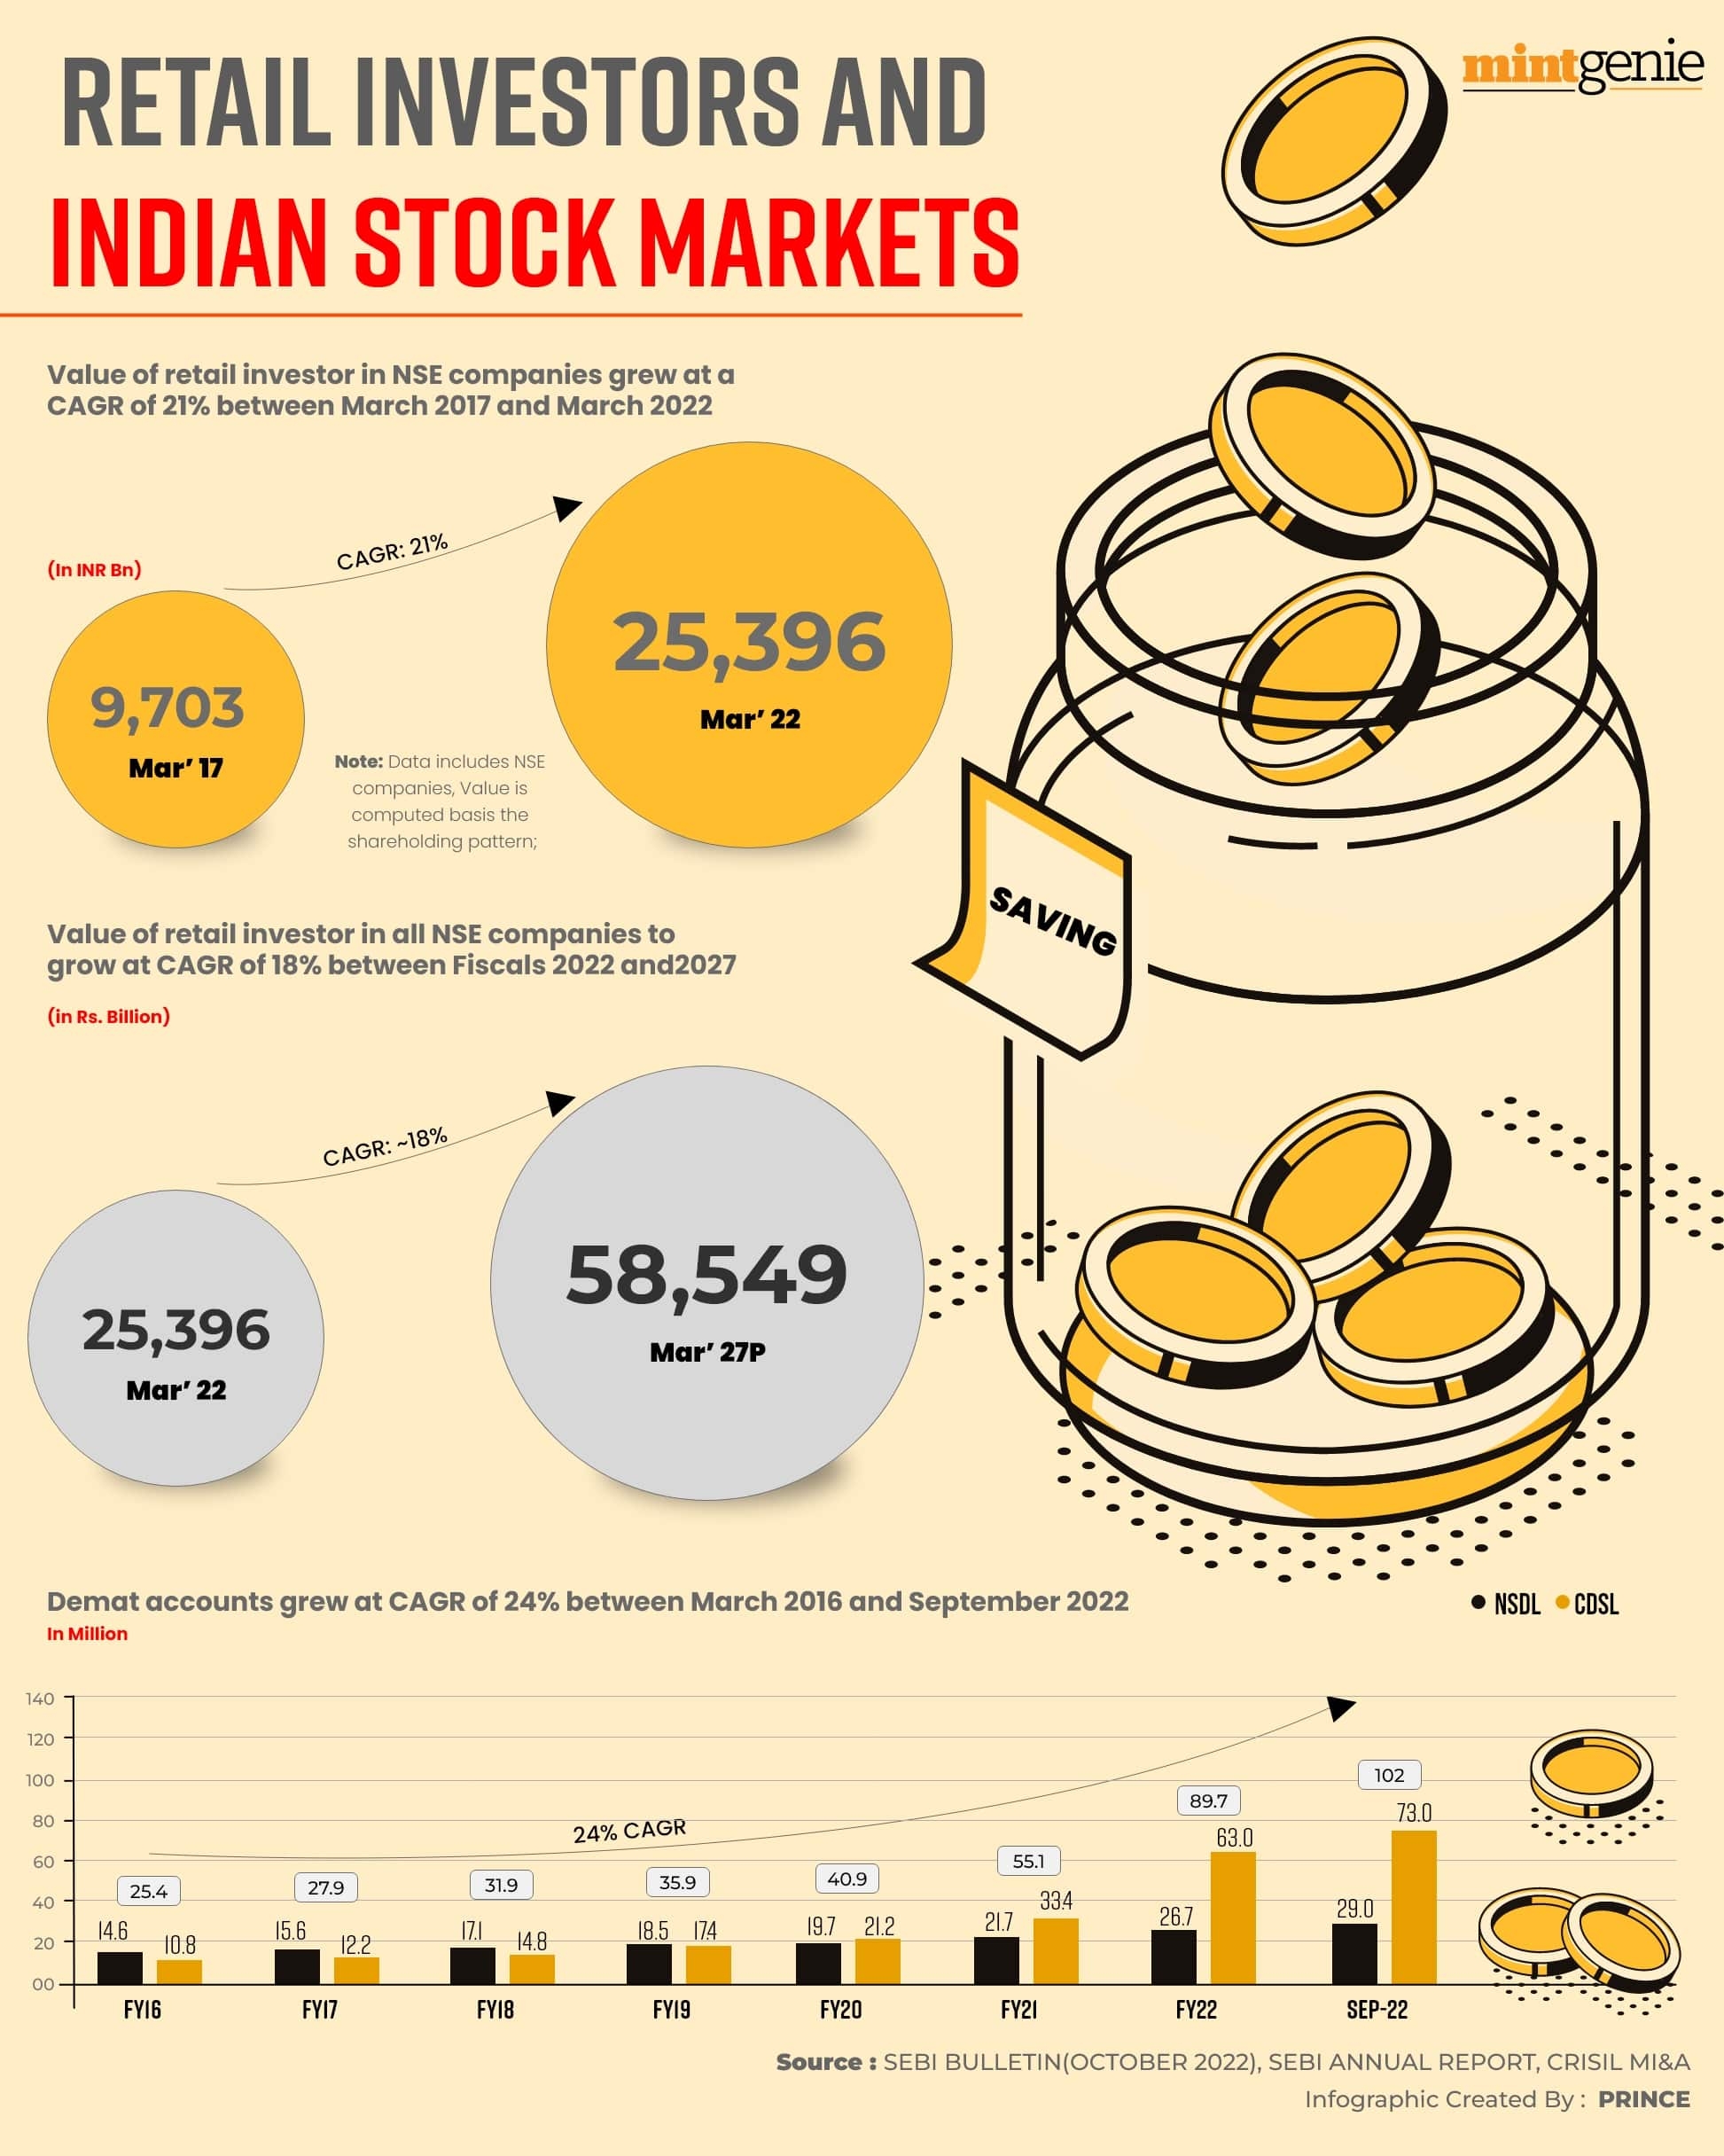 Retail investors and Indian stock markets 